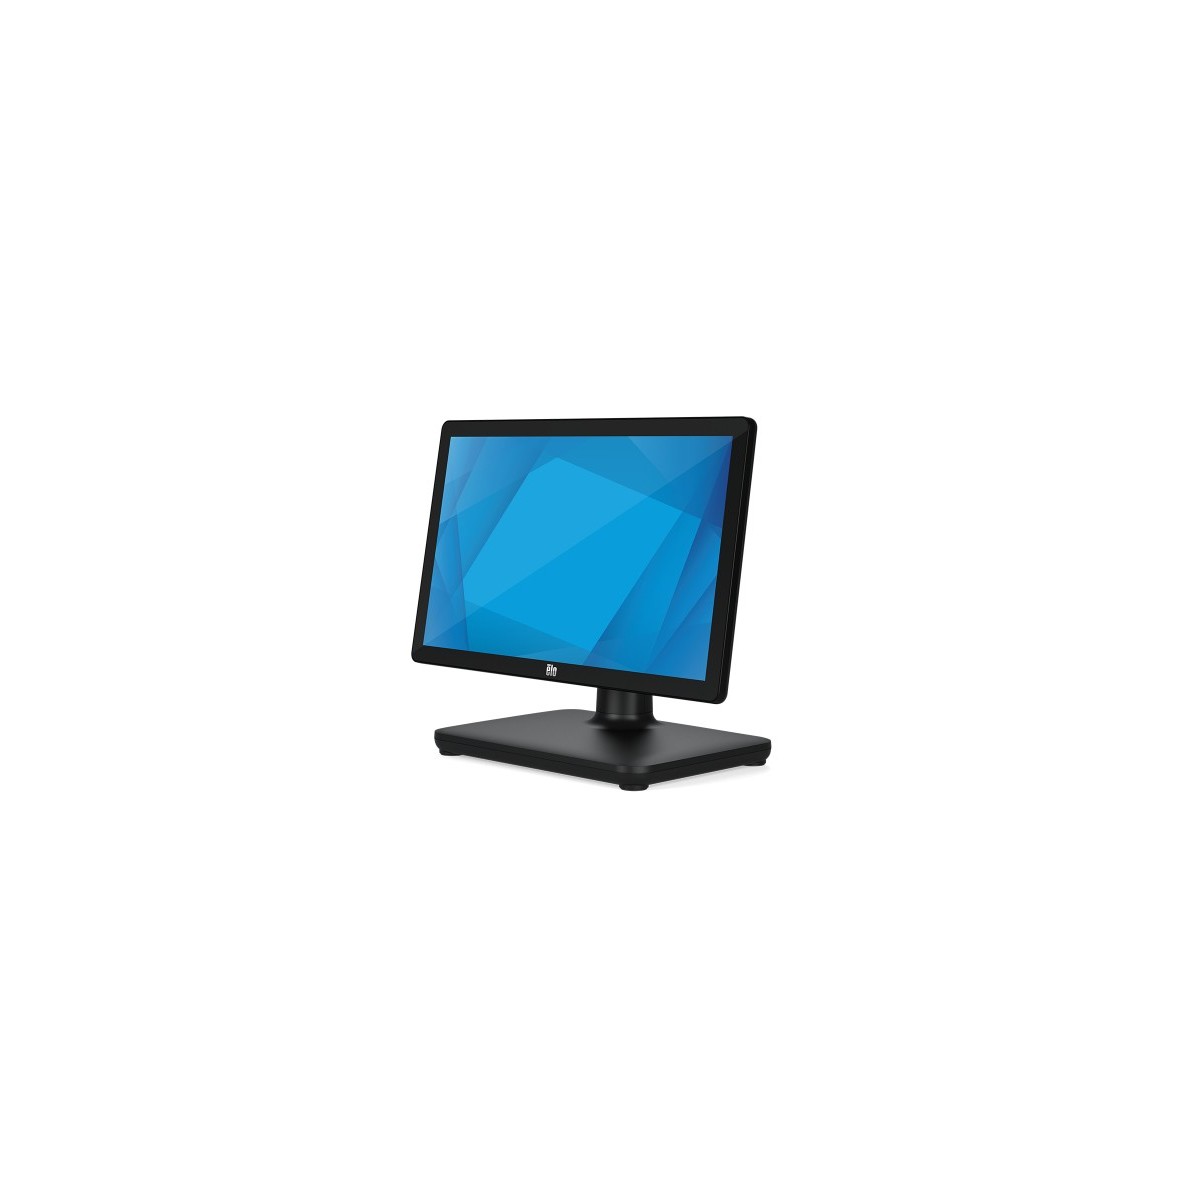 Elo Touch Solutions Elo Touch Solution E936953 - 54.6 cm (21.5") - 1920 x 1080 pixels - LCD - 212.5 cd/m² - Projected capacitive